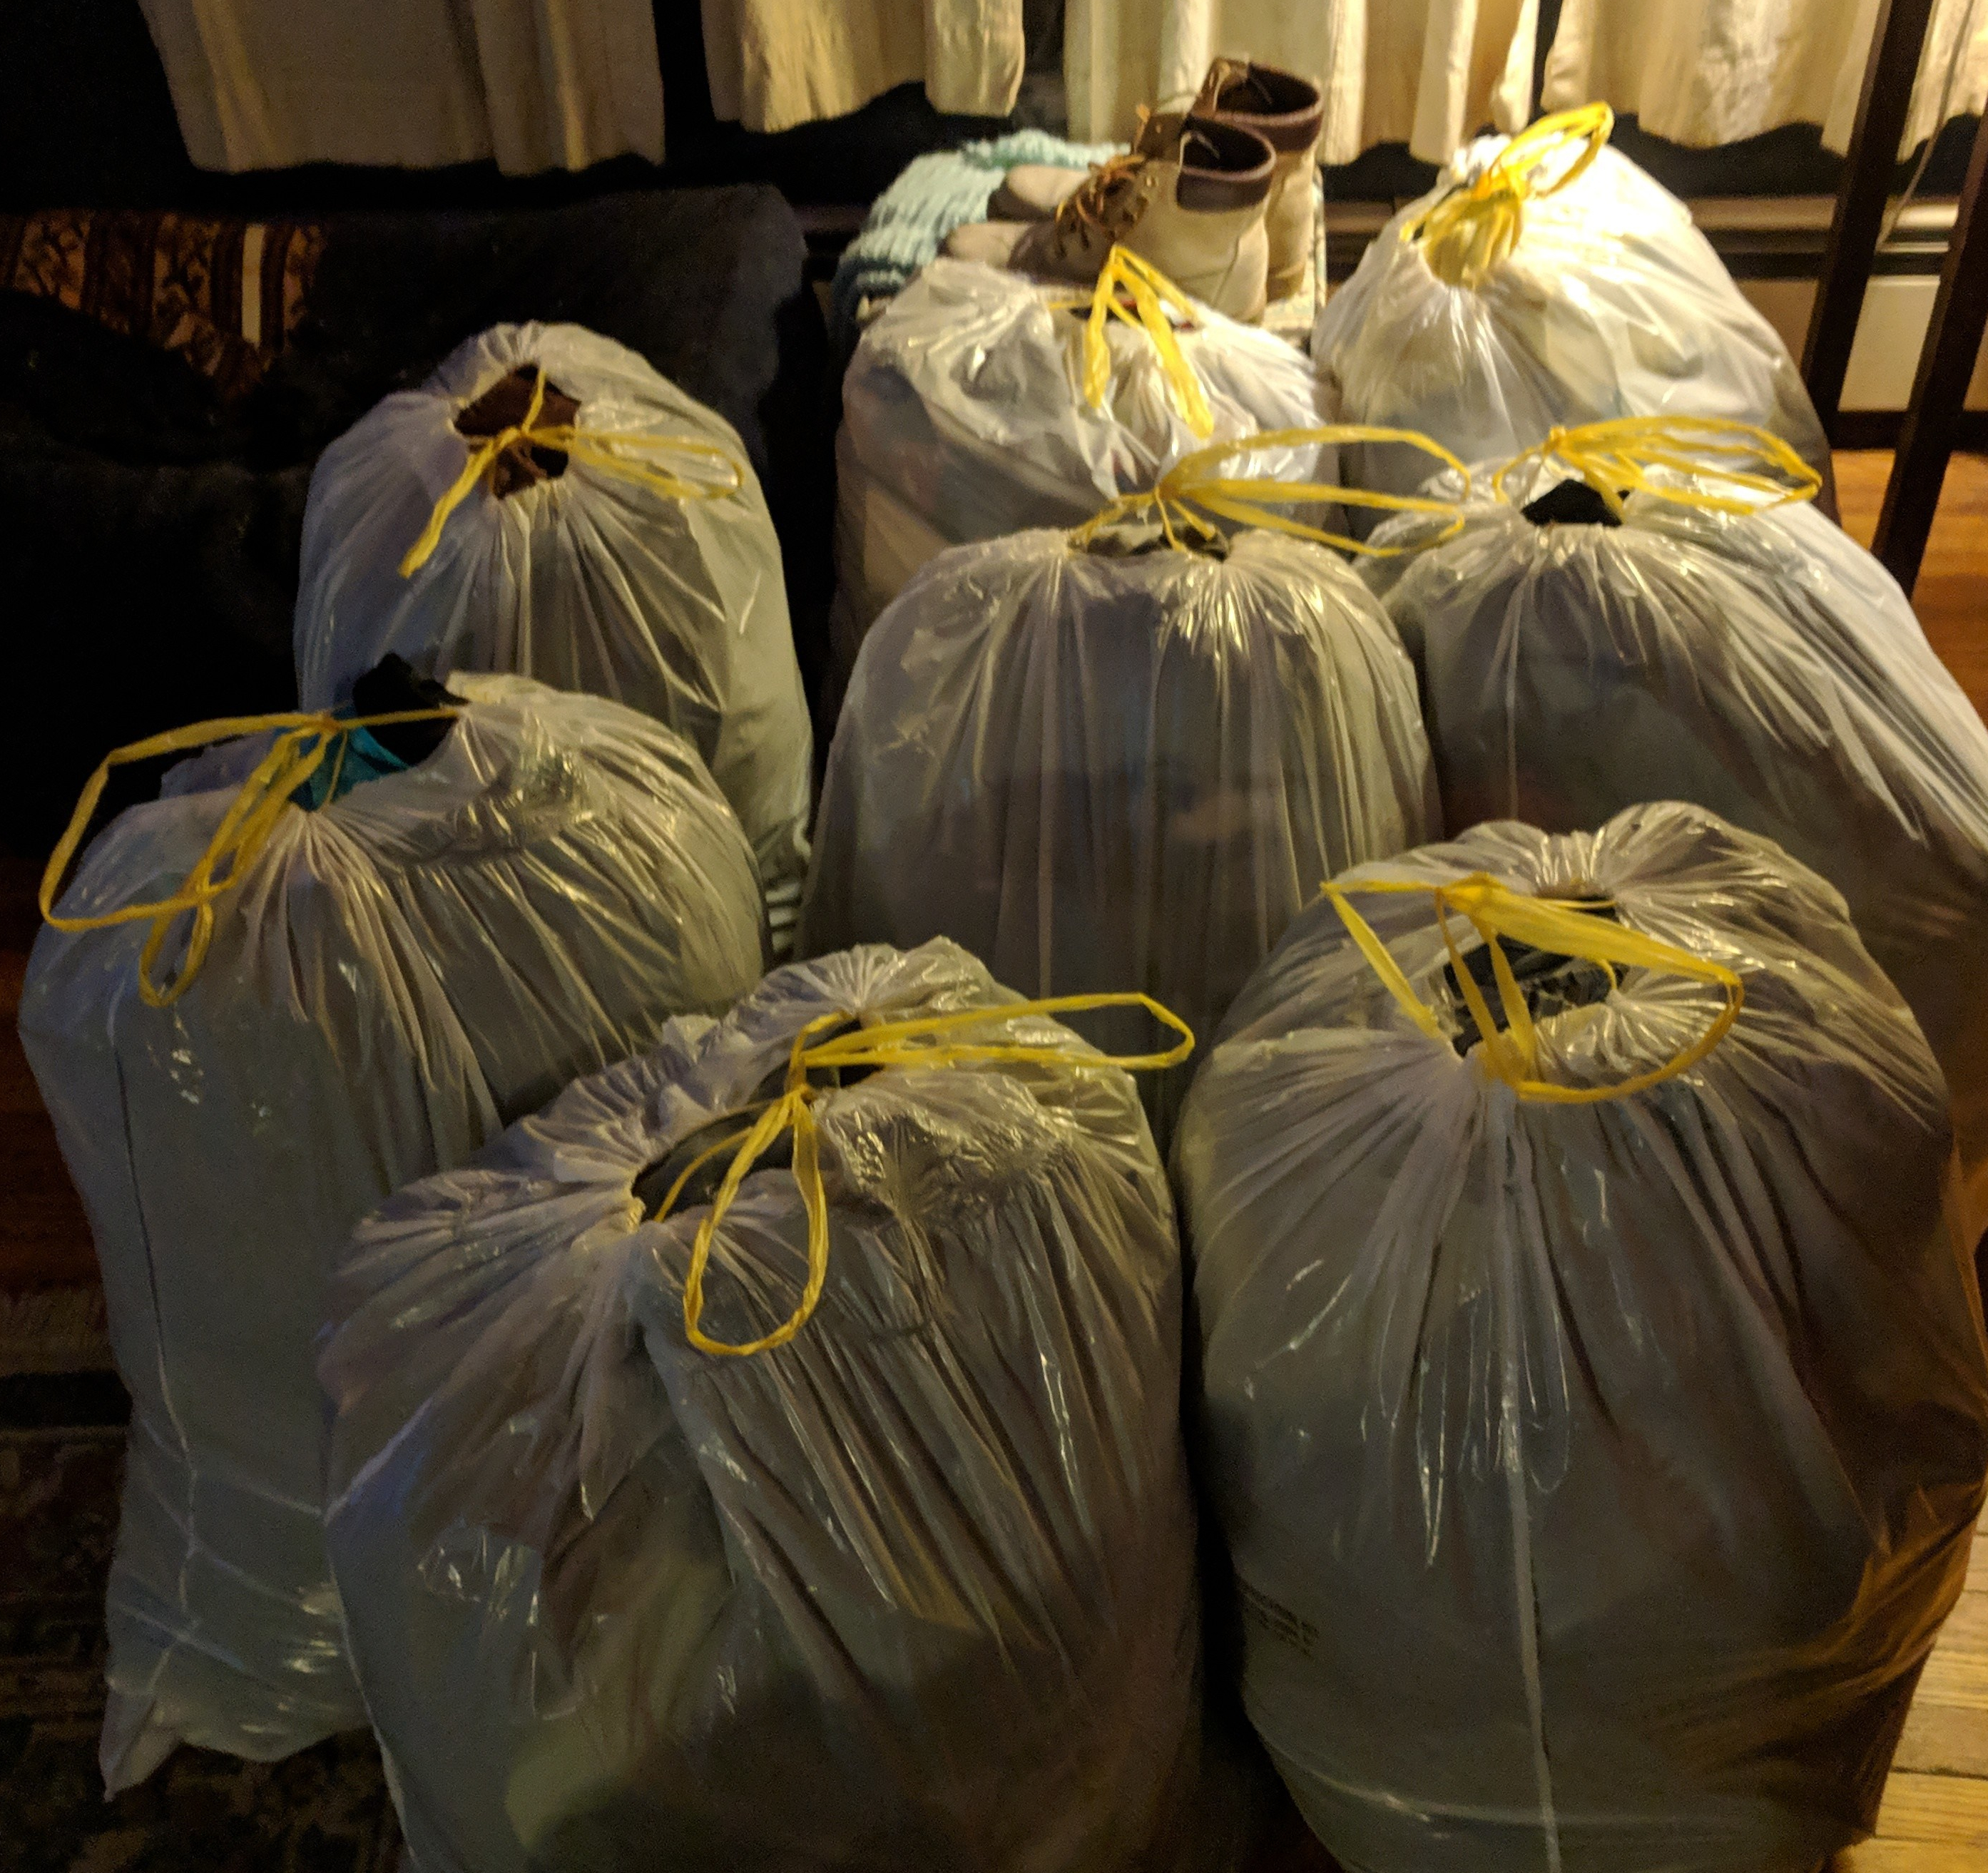 Eight trash bags full of clothing to be donated